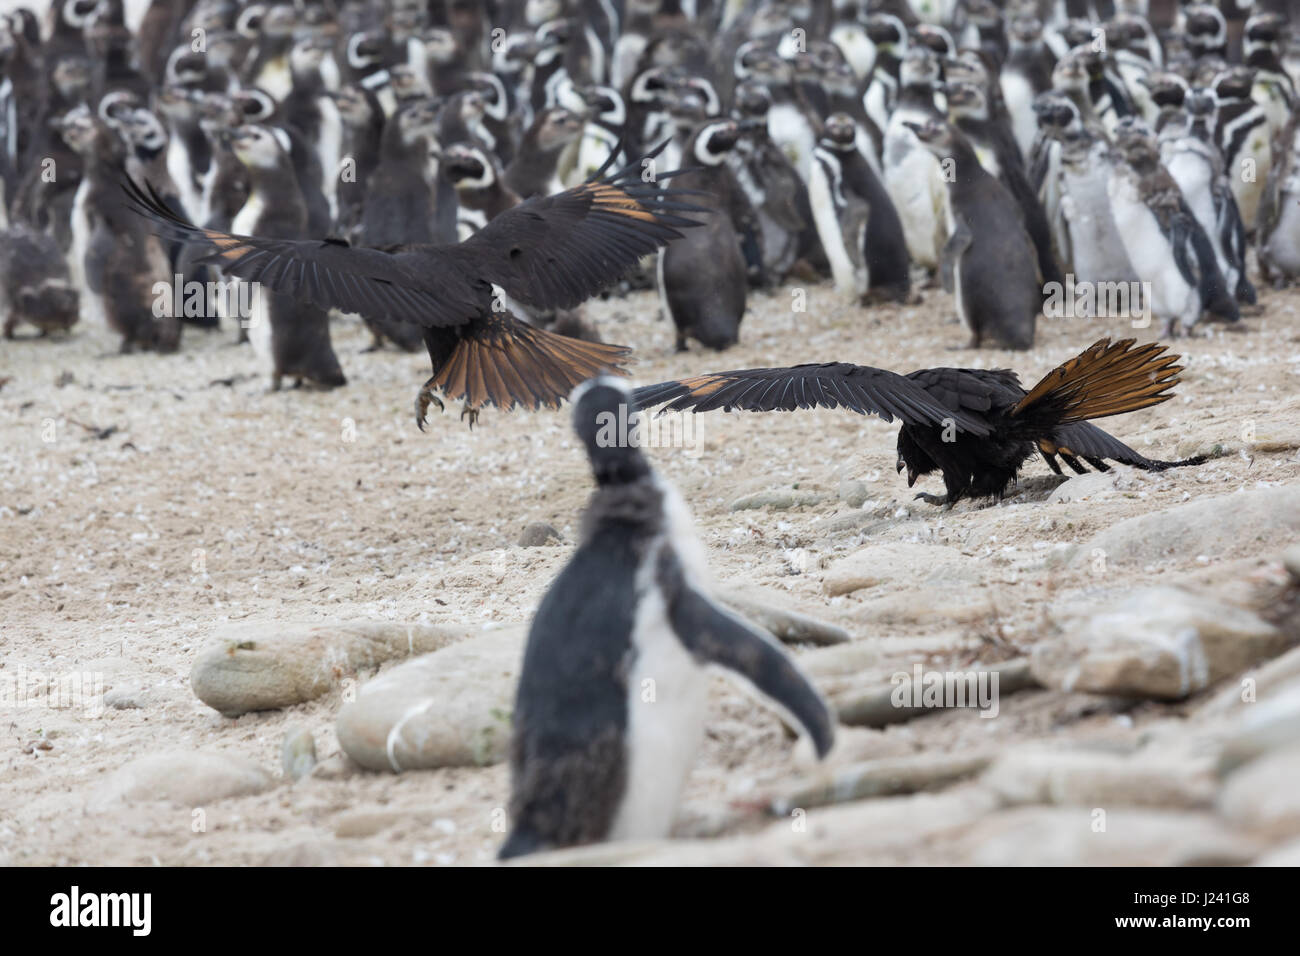 Young striated caracara with Magellanic penguins Stock Photo